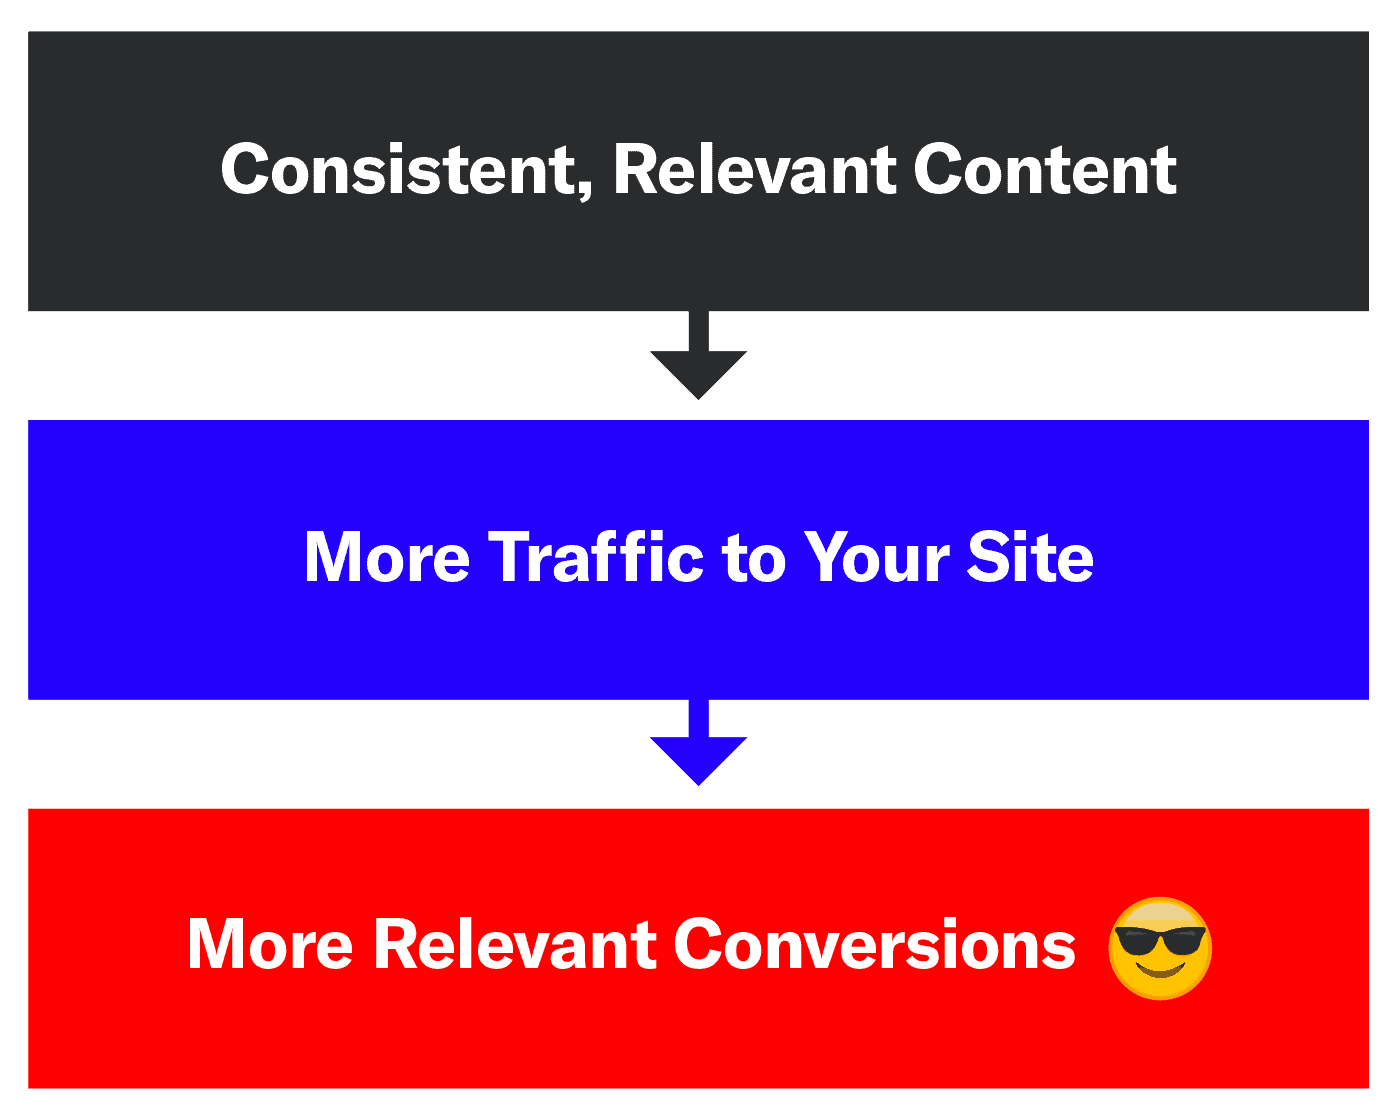 graphic showing how content drives traffic and conversions